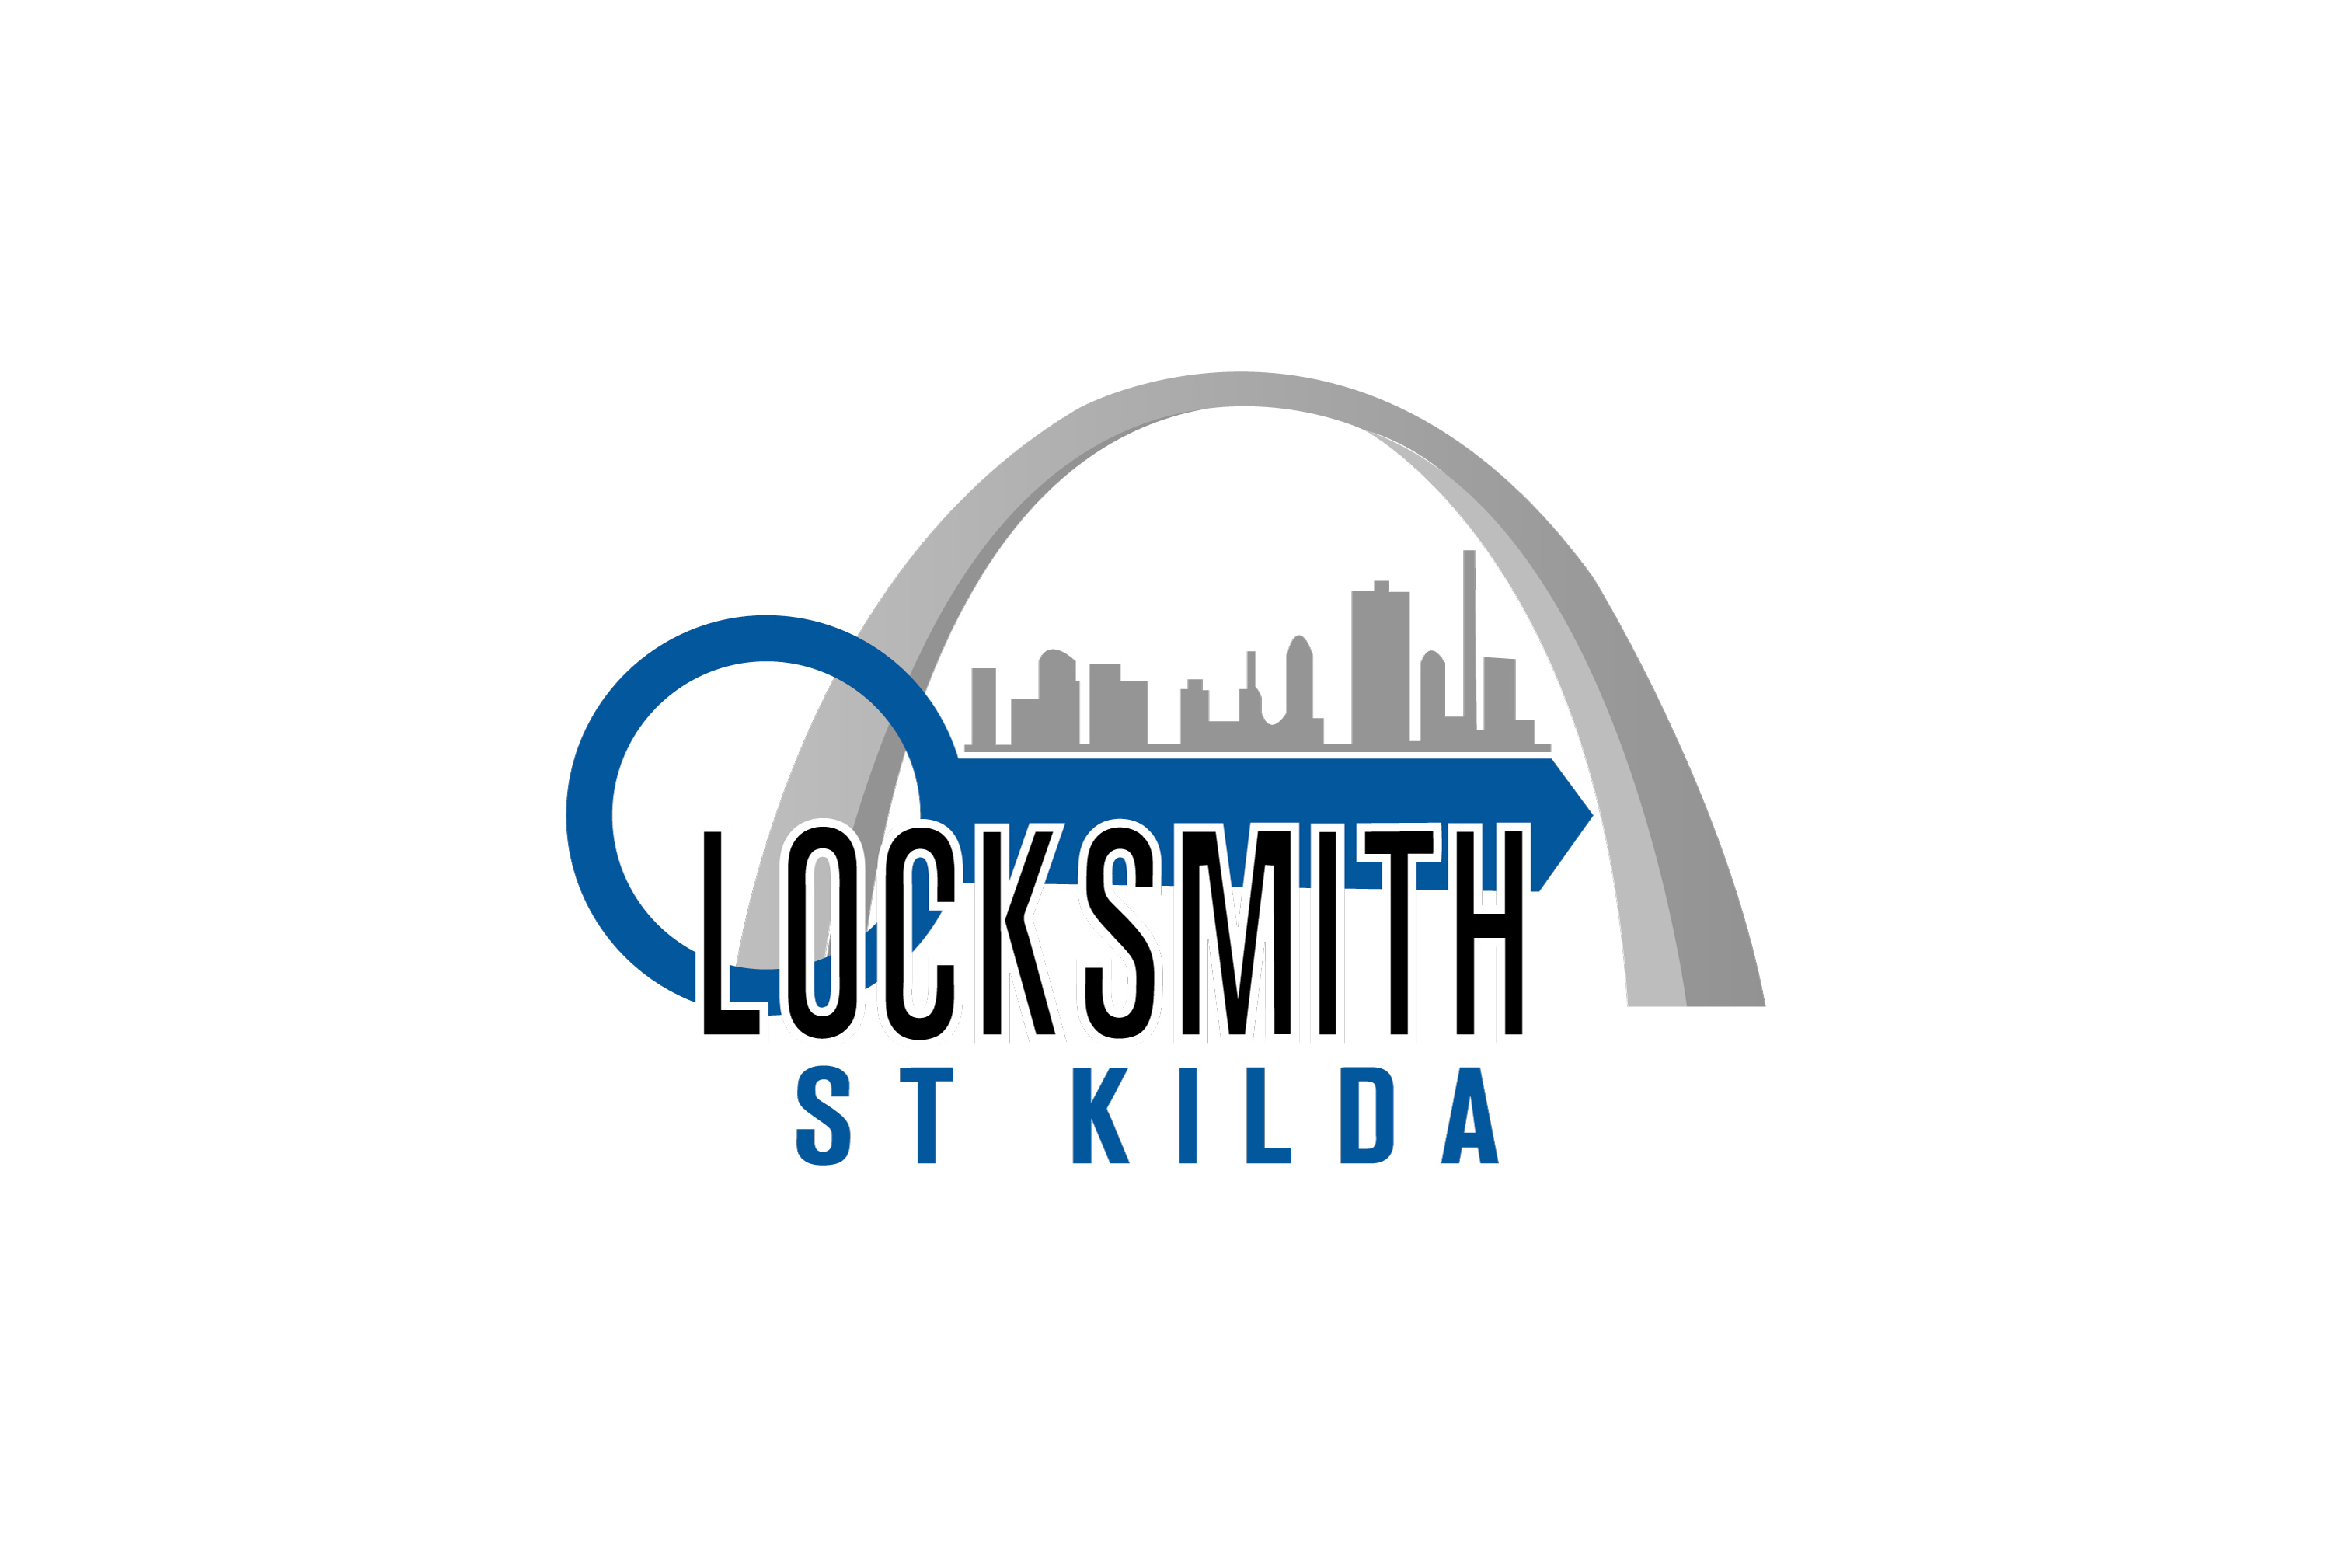 Locksmith St Kilda Has Expanded its Locksmith Services to Cover all Bayside Melbourne Suburbs